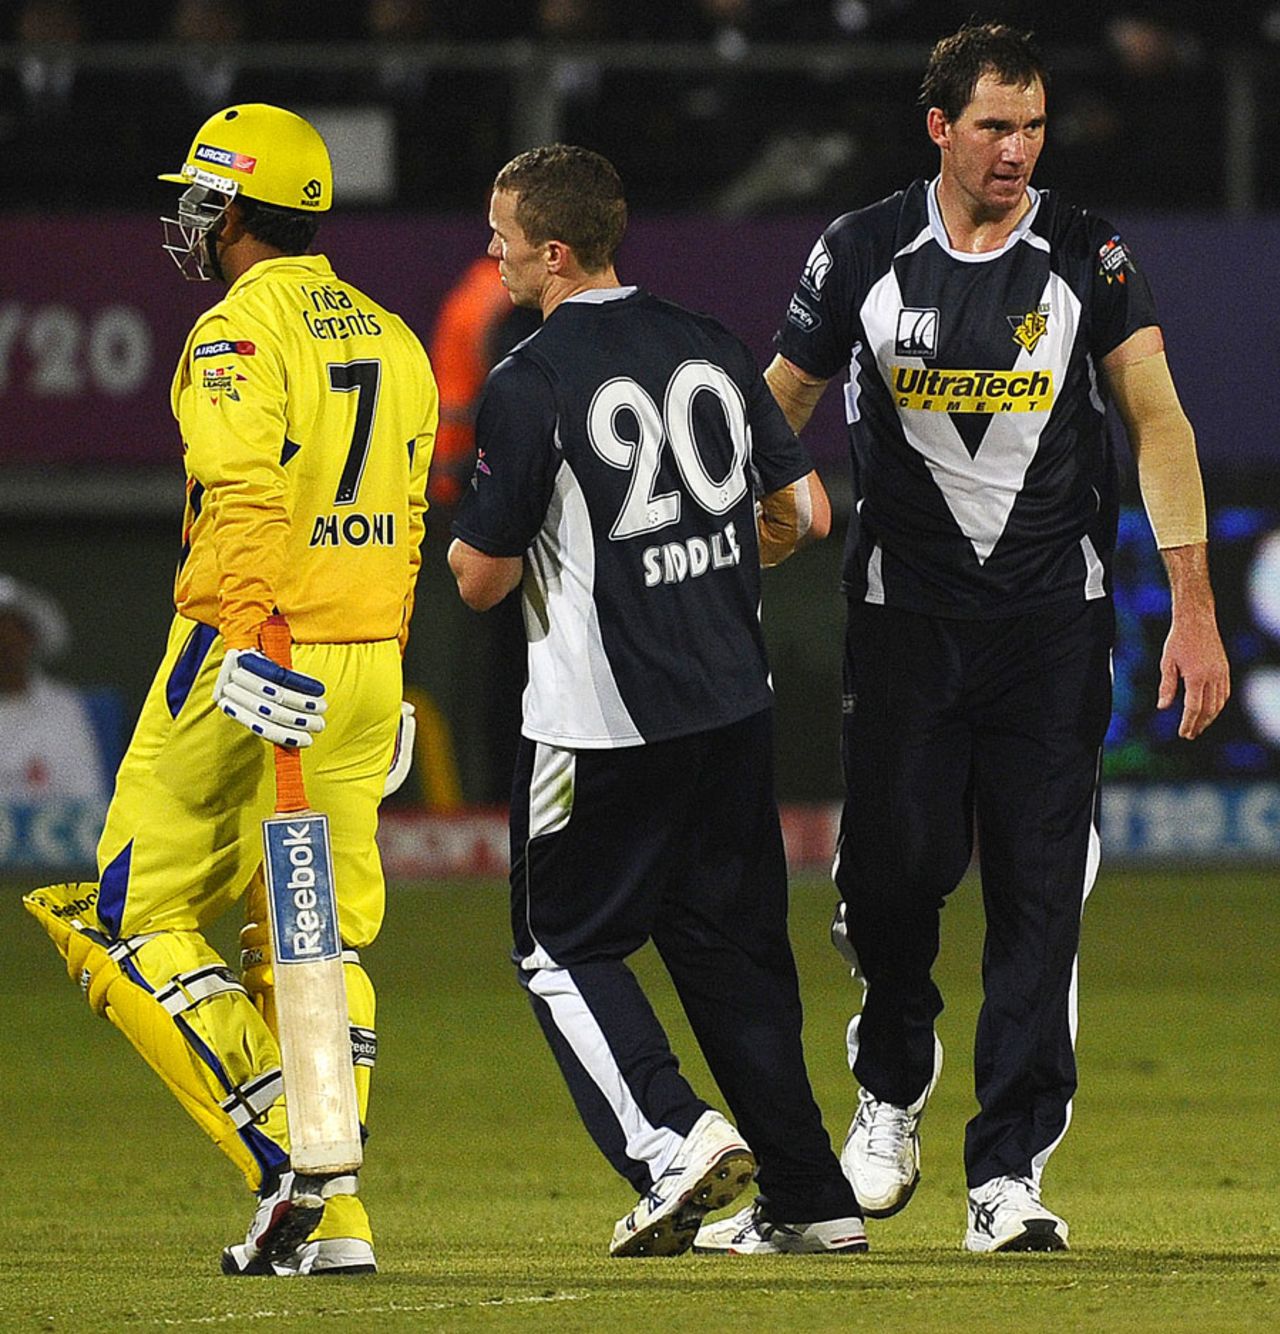 John Hastings celebrates after foxing MS Dhoni with a slower ball, Chennai v Victoria, Champions League Twenty20 2010, Port Elizabeth, September 18, 2010